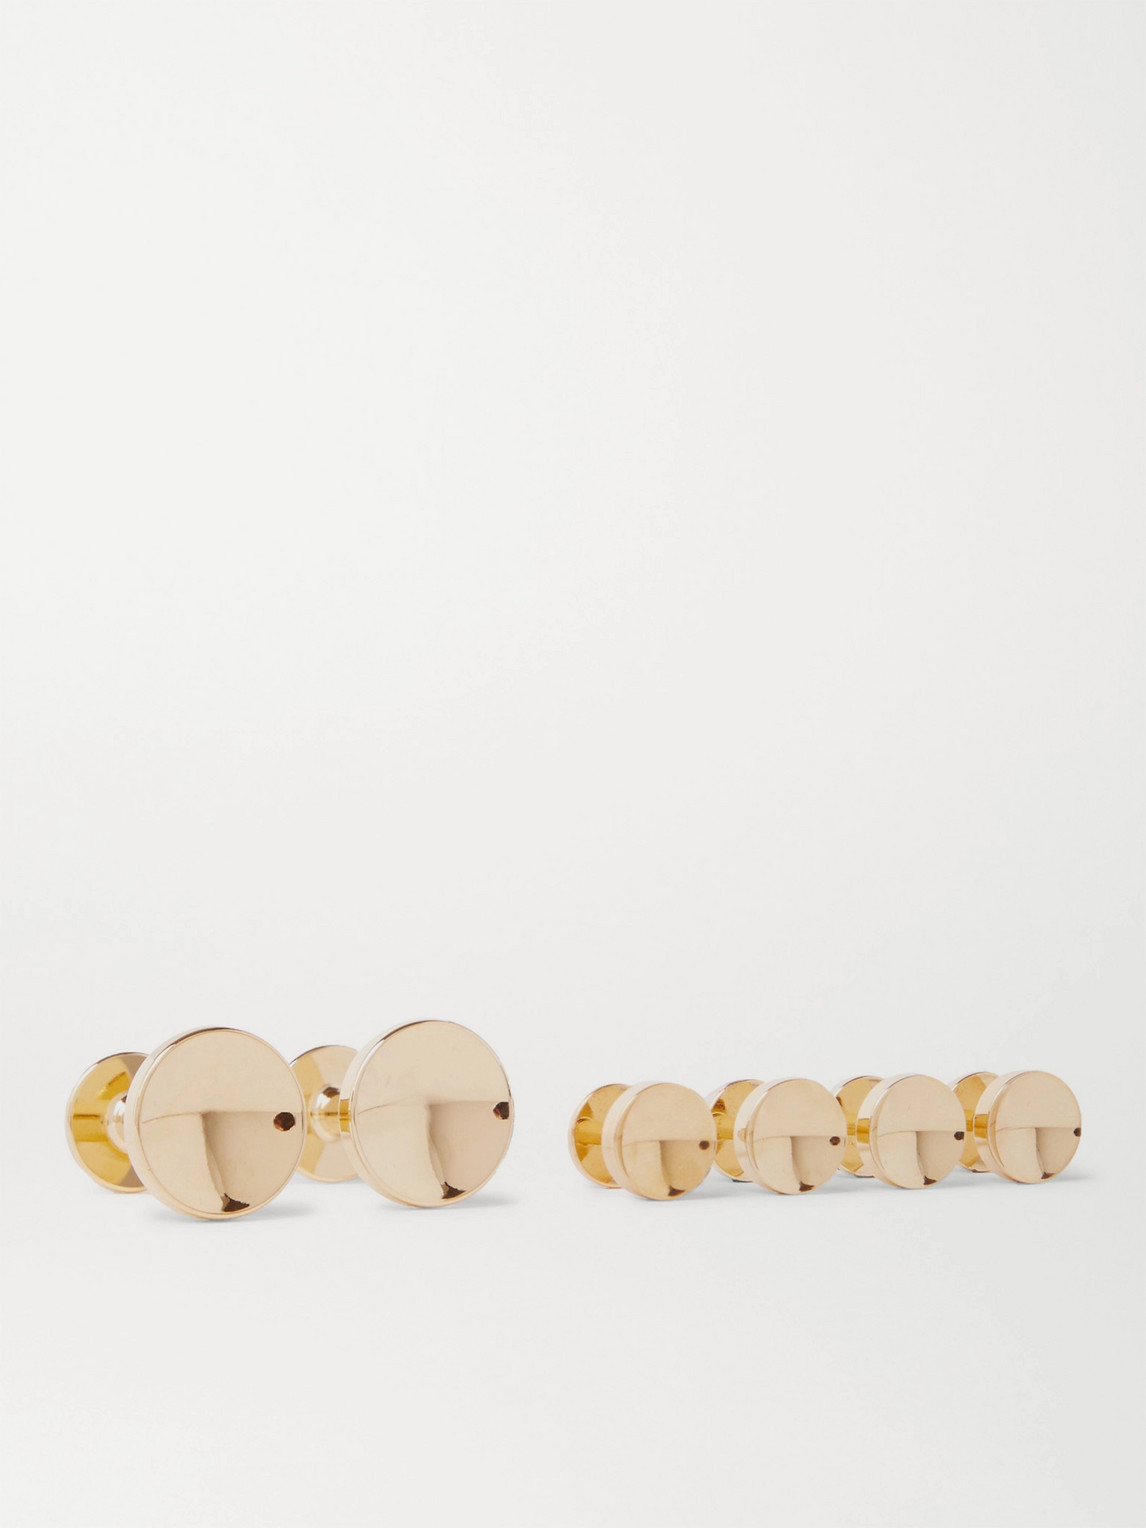 Alice Made This Elliot Gold-plated Cufflinks And Shirt Stud Set